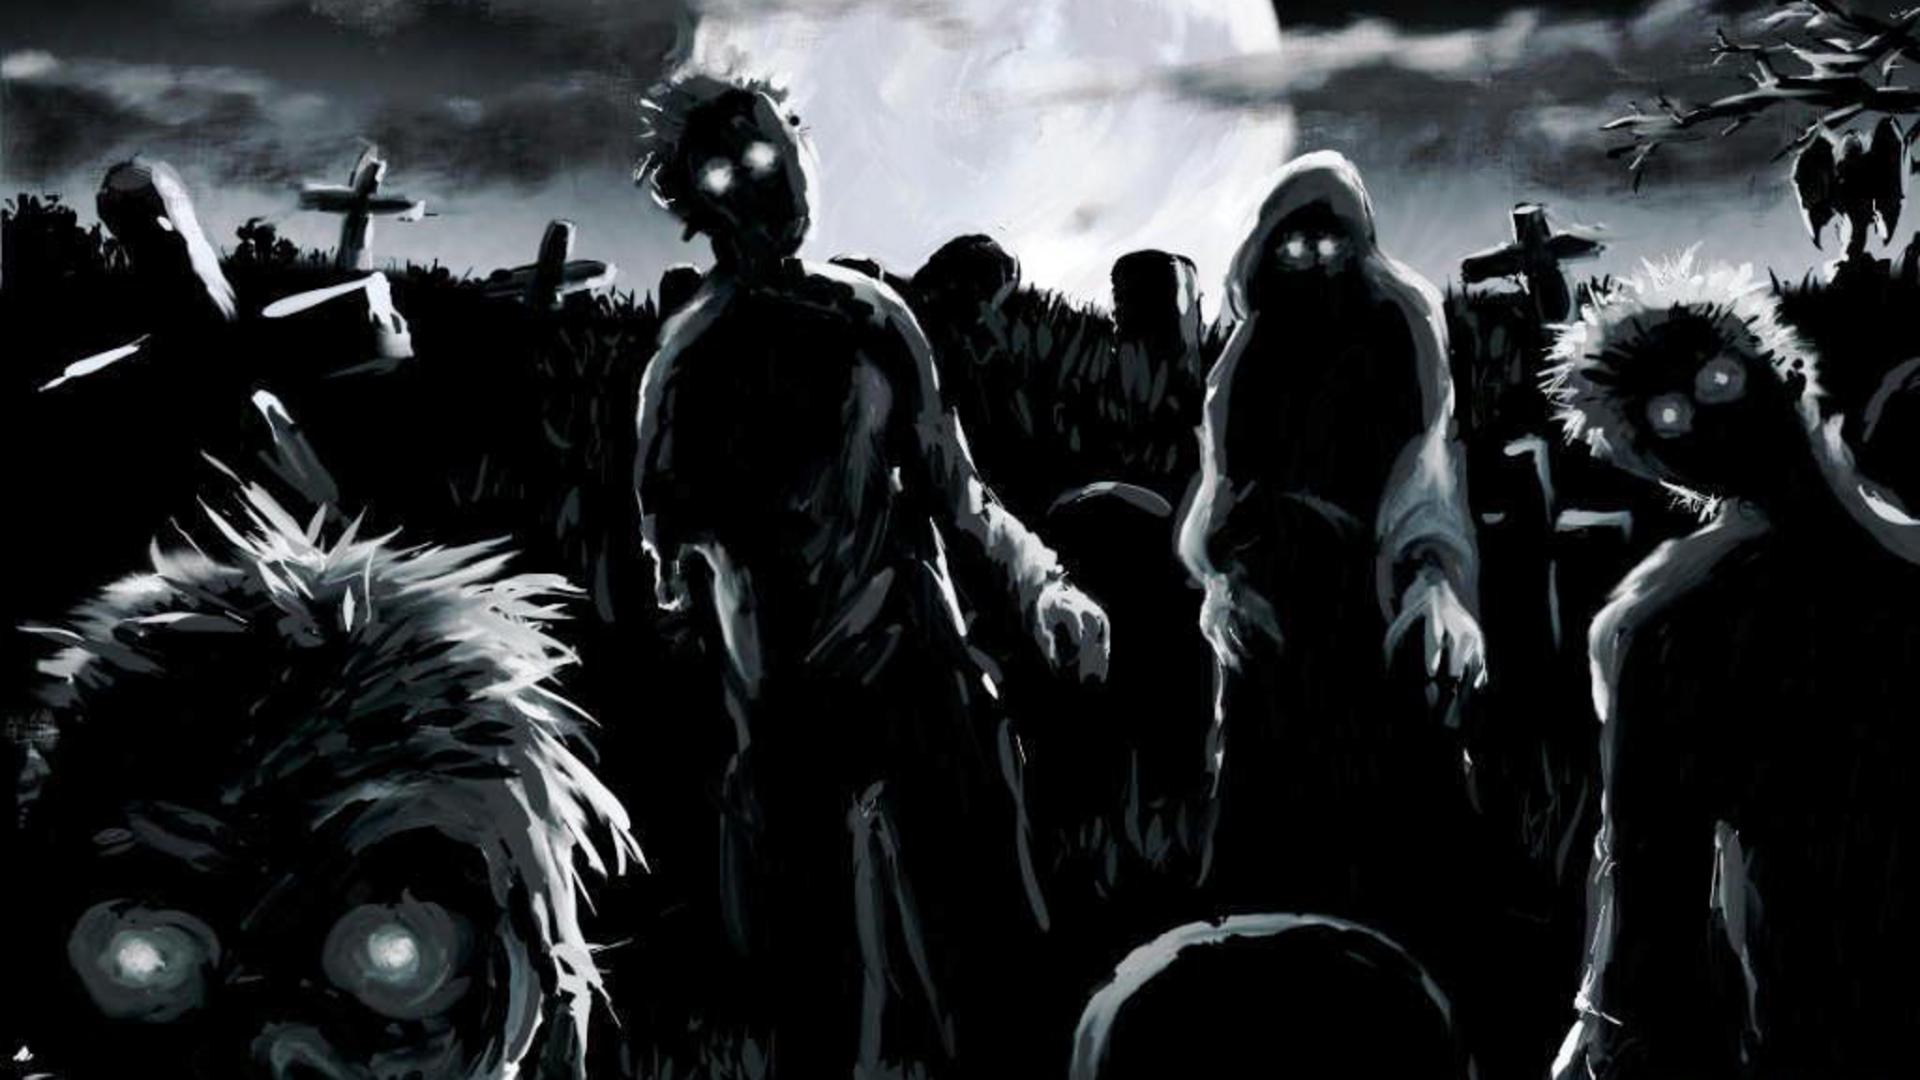 zombie wallpaper,people,crowd,darkness,photography,fictional character